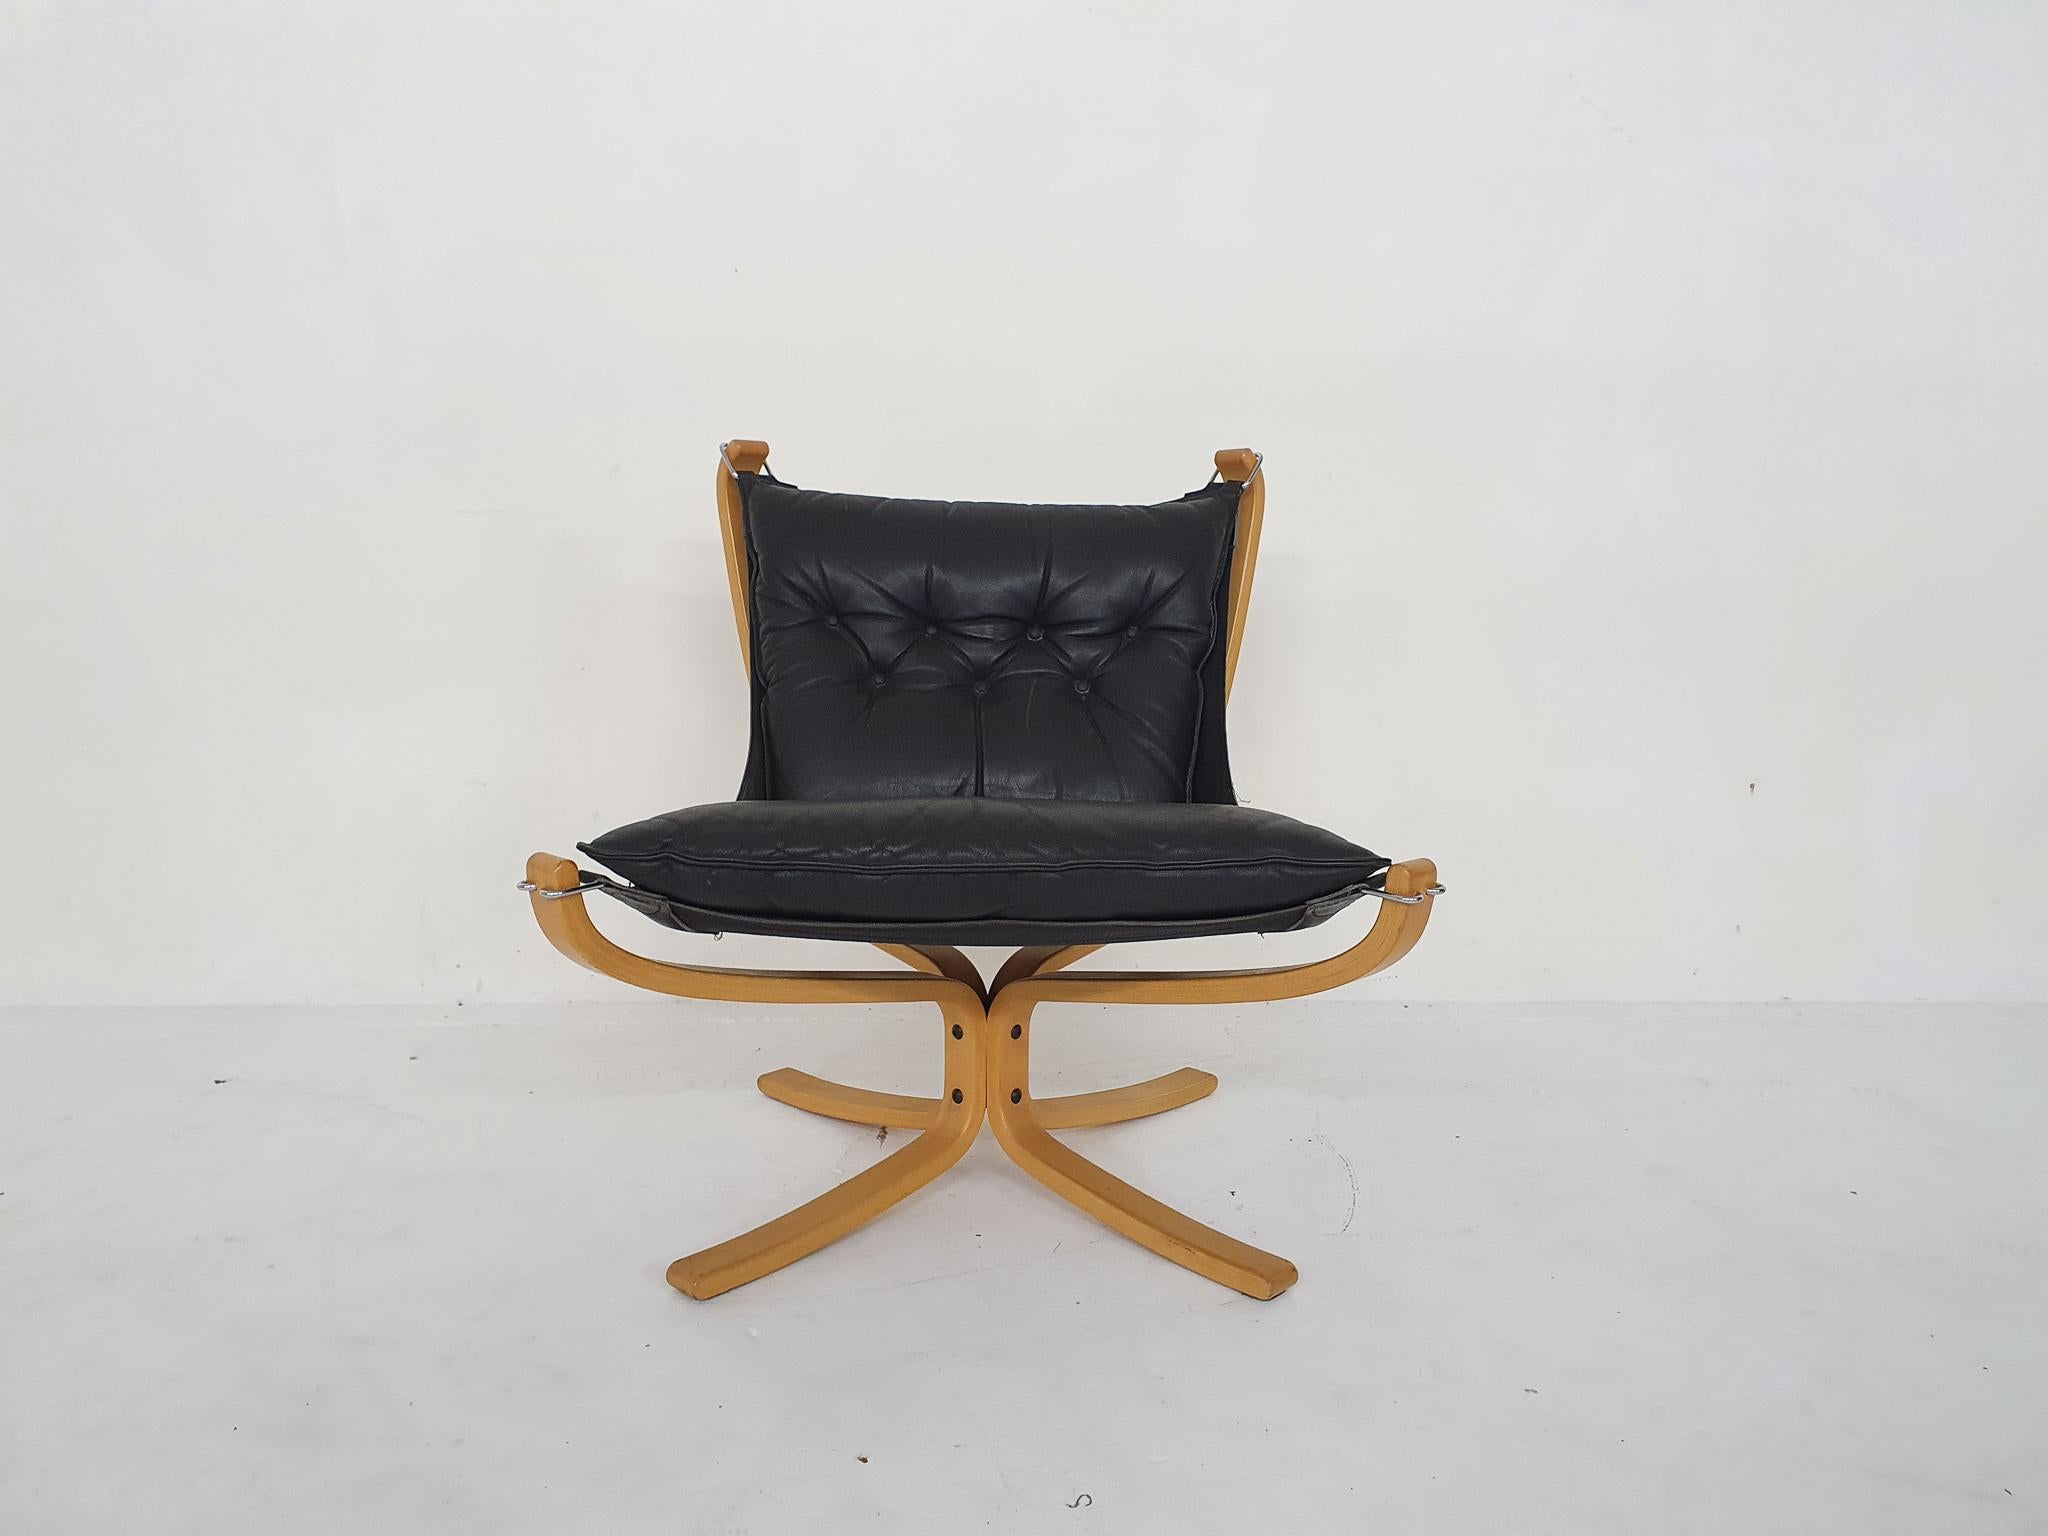 Wooden lounge chair with canvas back and black leather cushhion. One button has been replaced by a larger one.
In good condition.